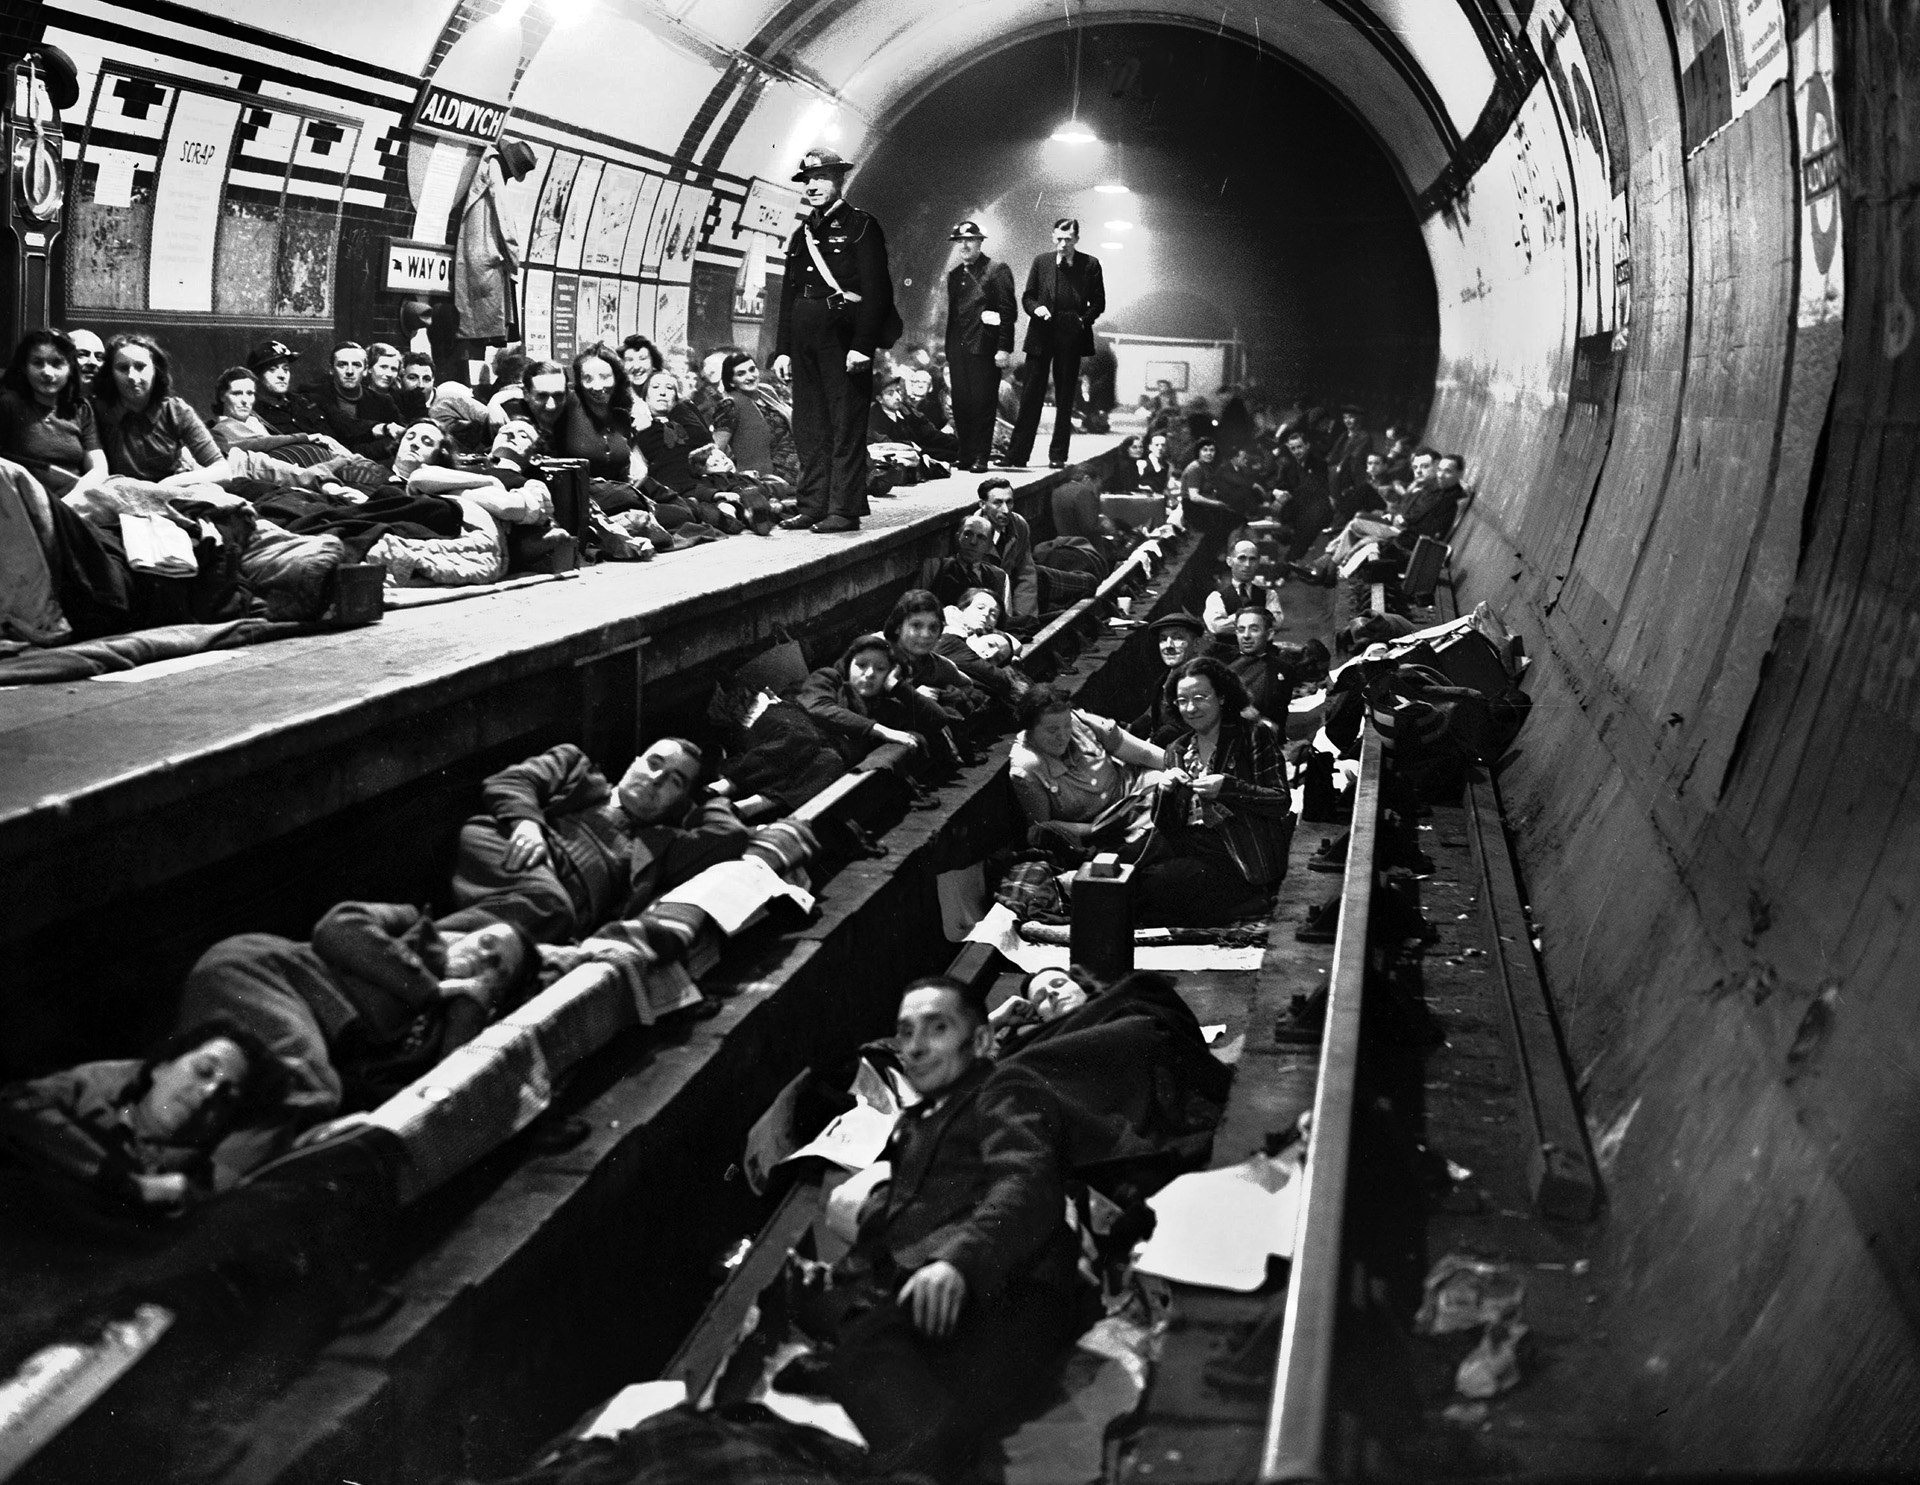 Aldwych underground subway station in central London was used as a bomb shelter. Many Londoners sent their children to the countryside as protection from the raids on the city.